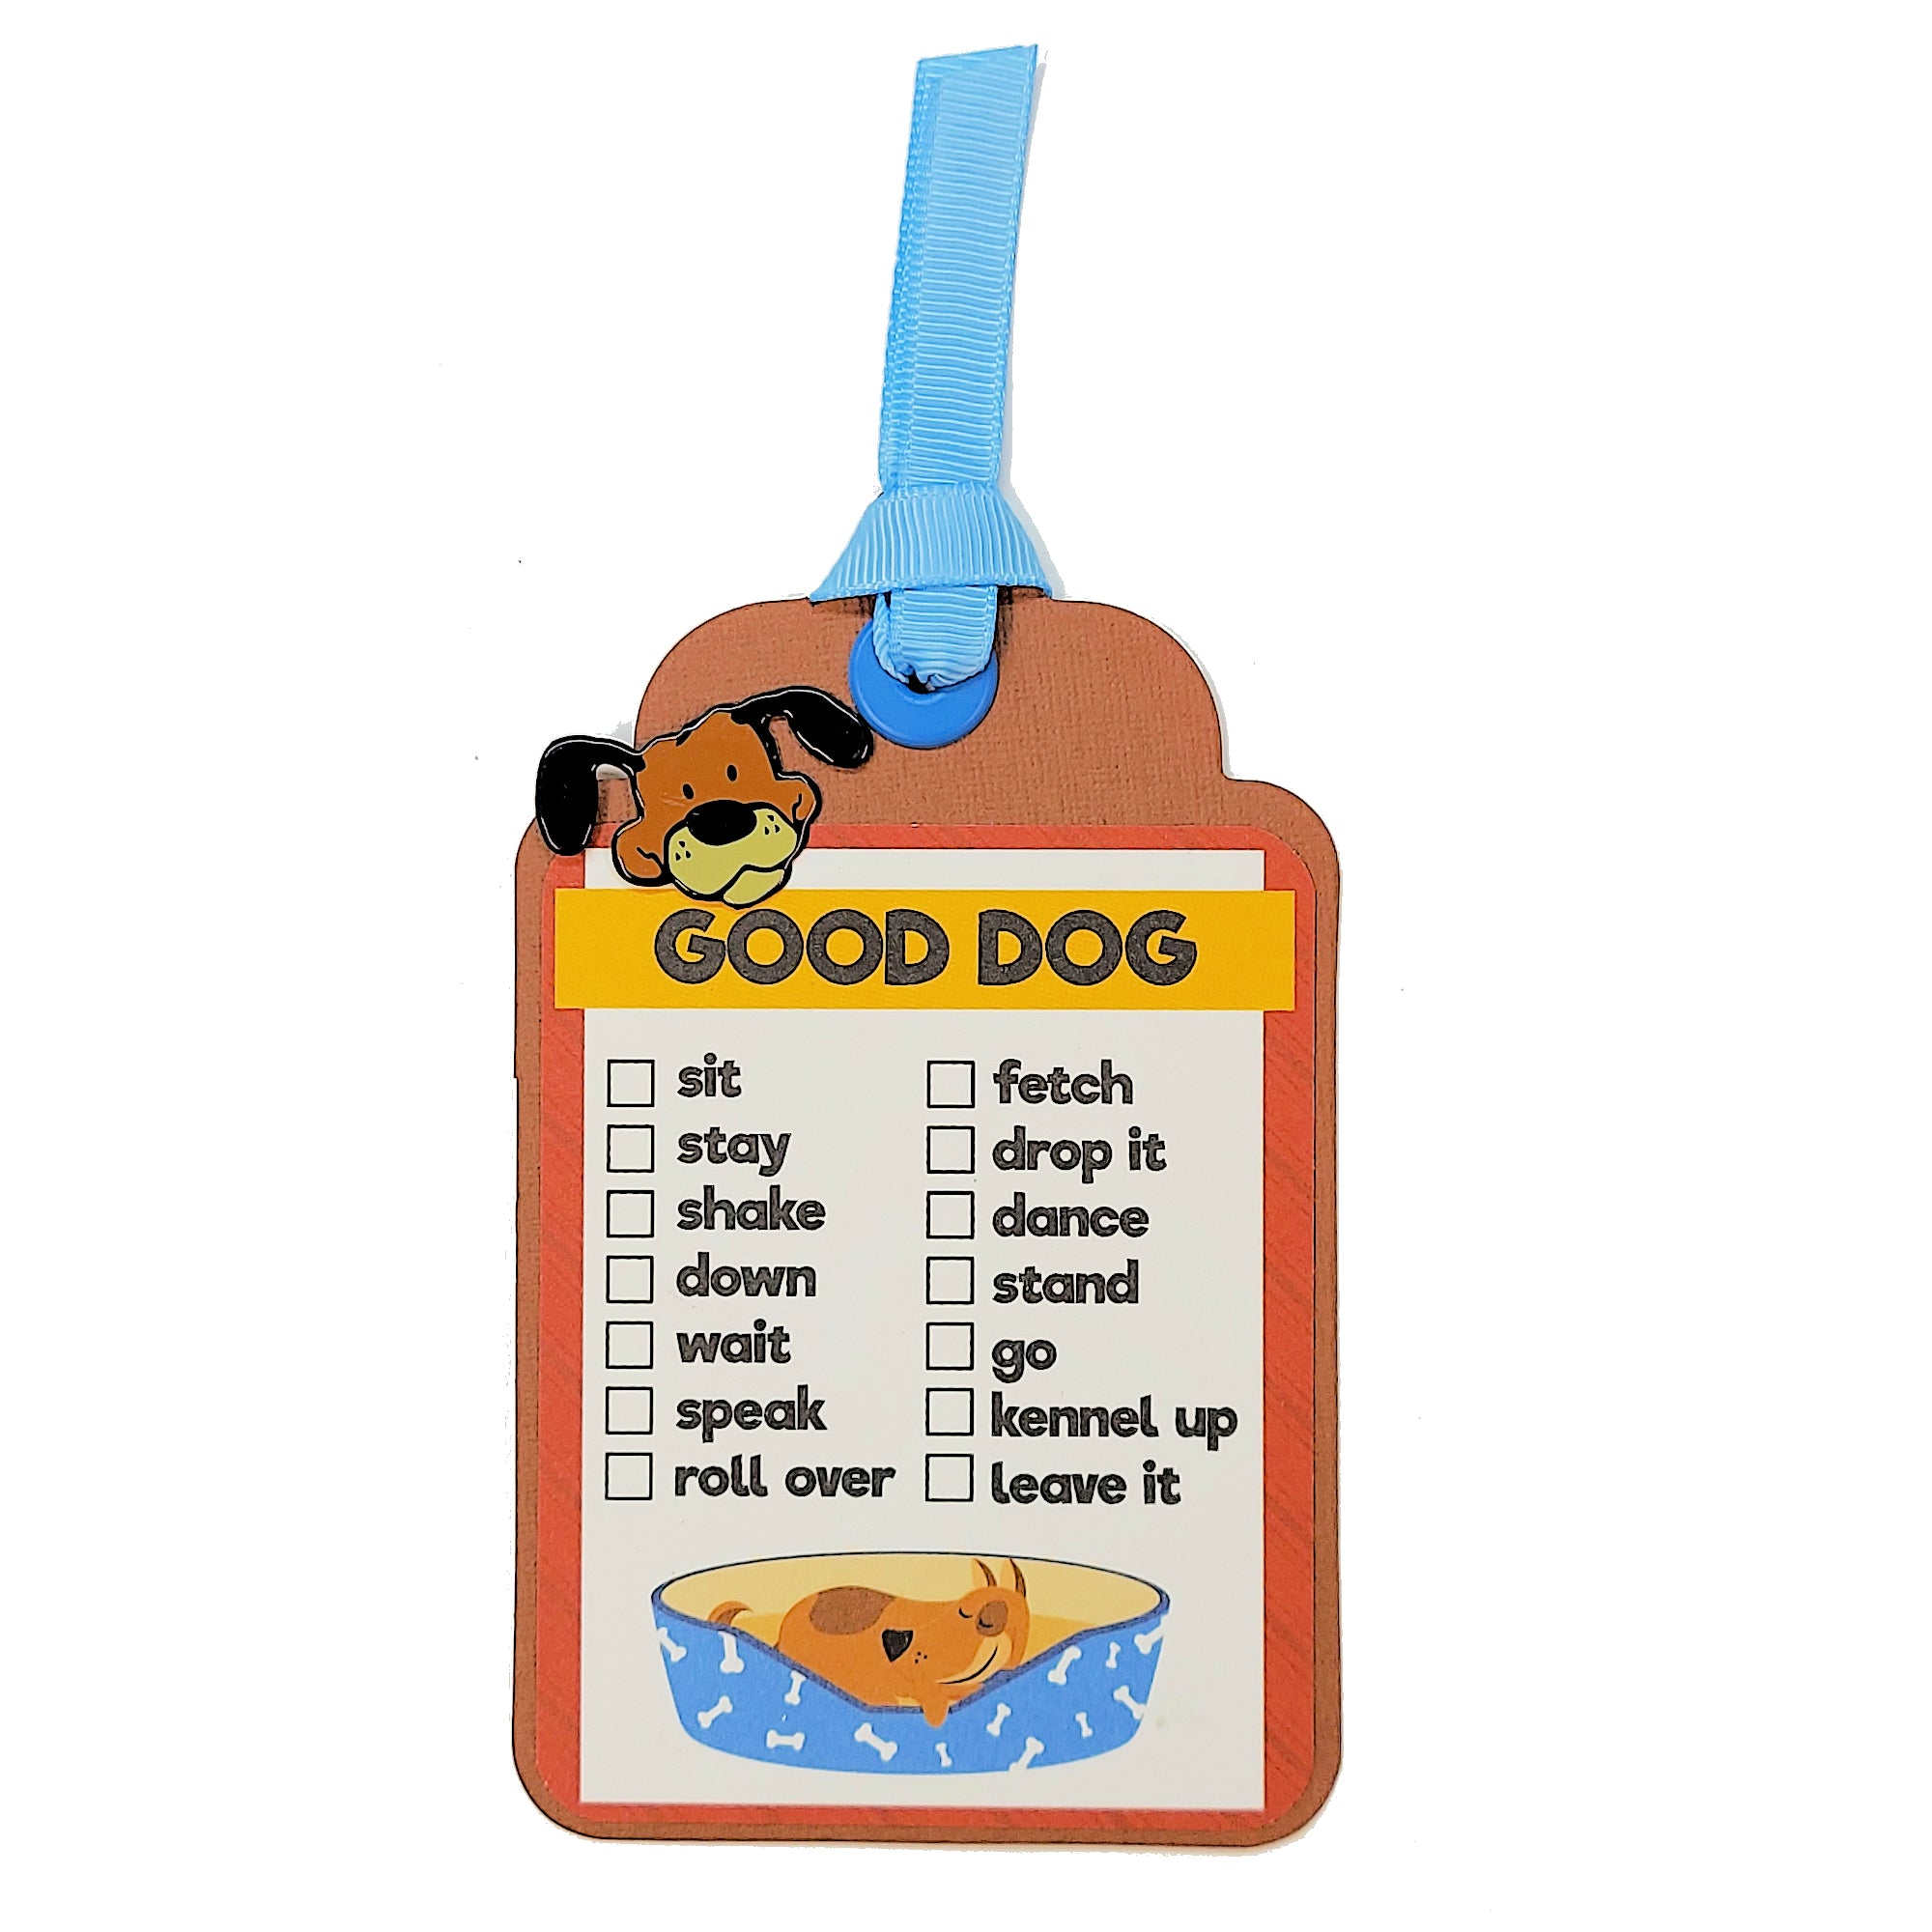 Good Dog Tag 3 x 5 Coordinating Scrapbook Tag Embellishment by SSC Designs